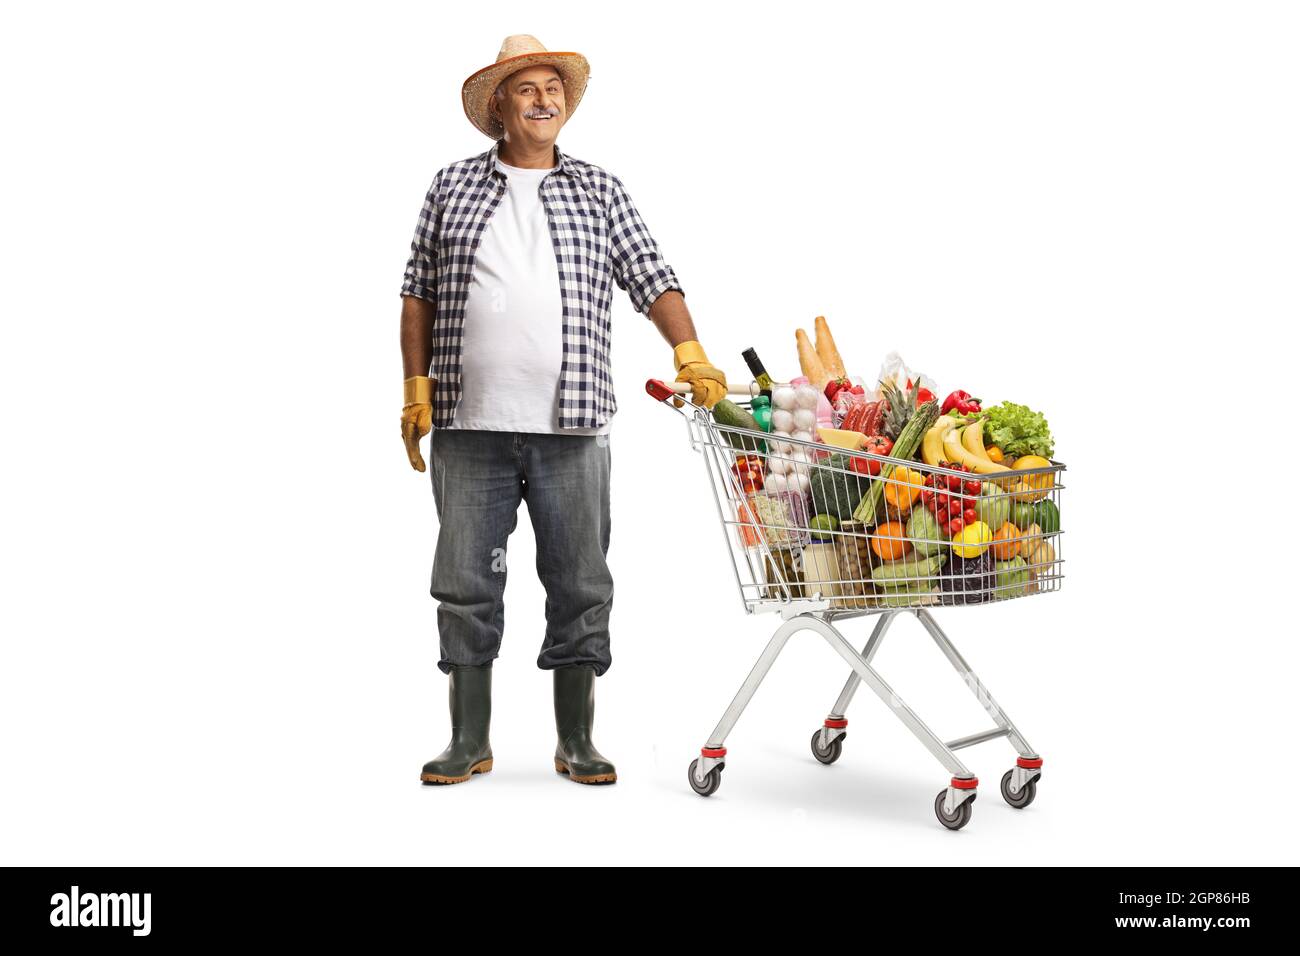 Farmer posing with a shopping cart full of food products isolated on white background Stock Photo